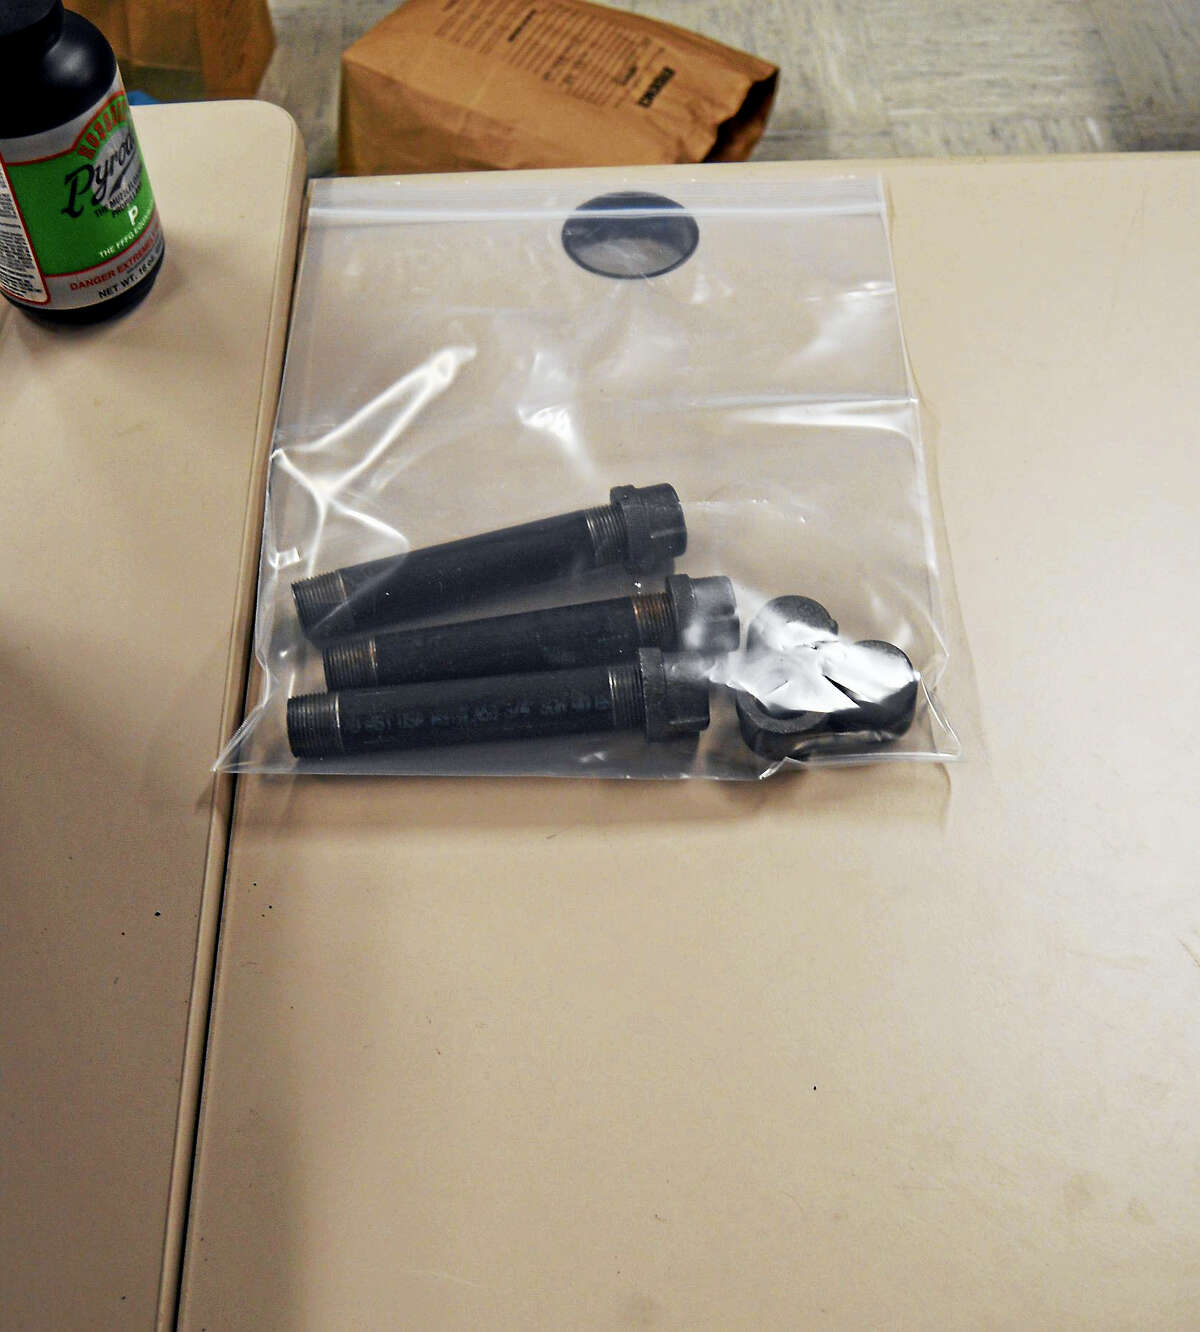 Pipe bomb materials that were seized by state police.